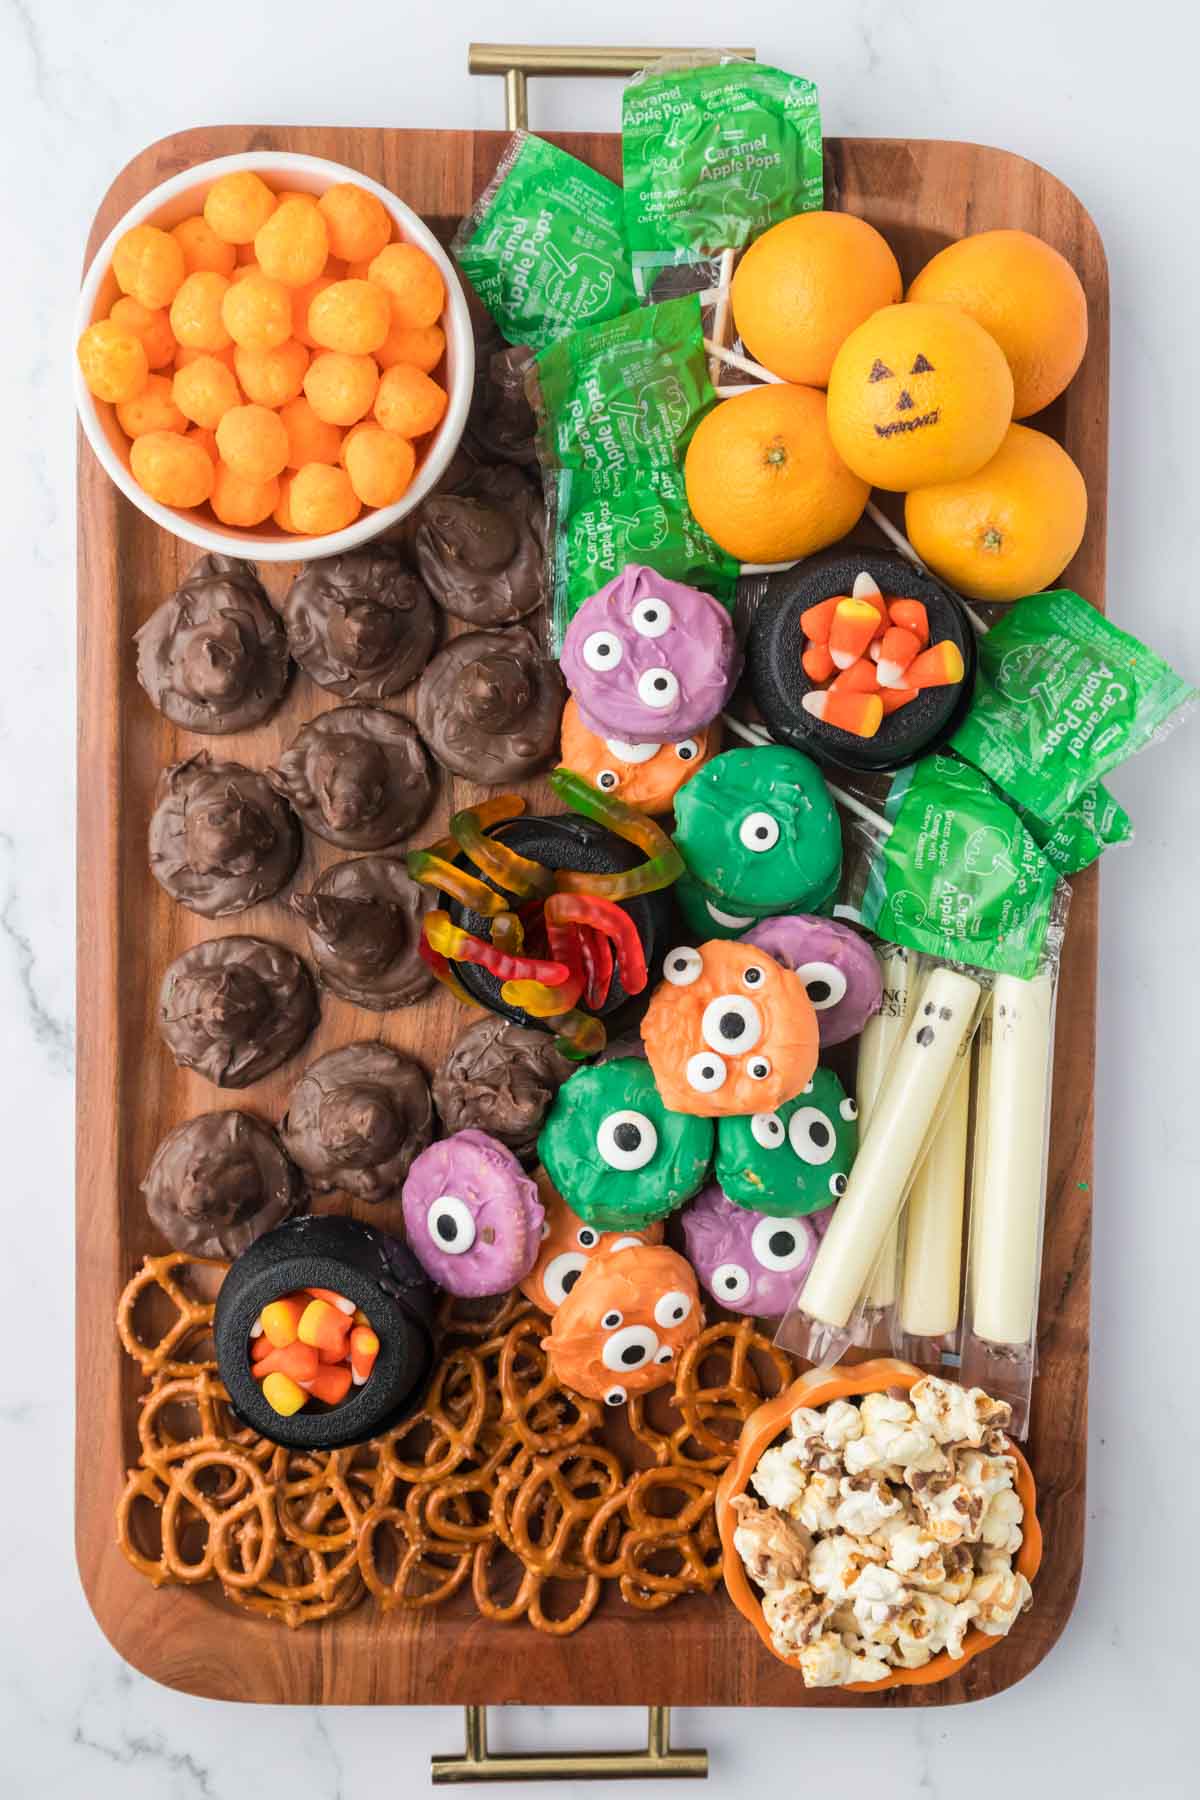 Halloween snack board with pumpkins, string cheese ghosts, and more